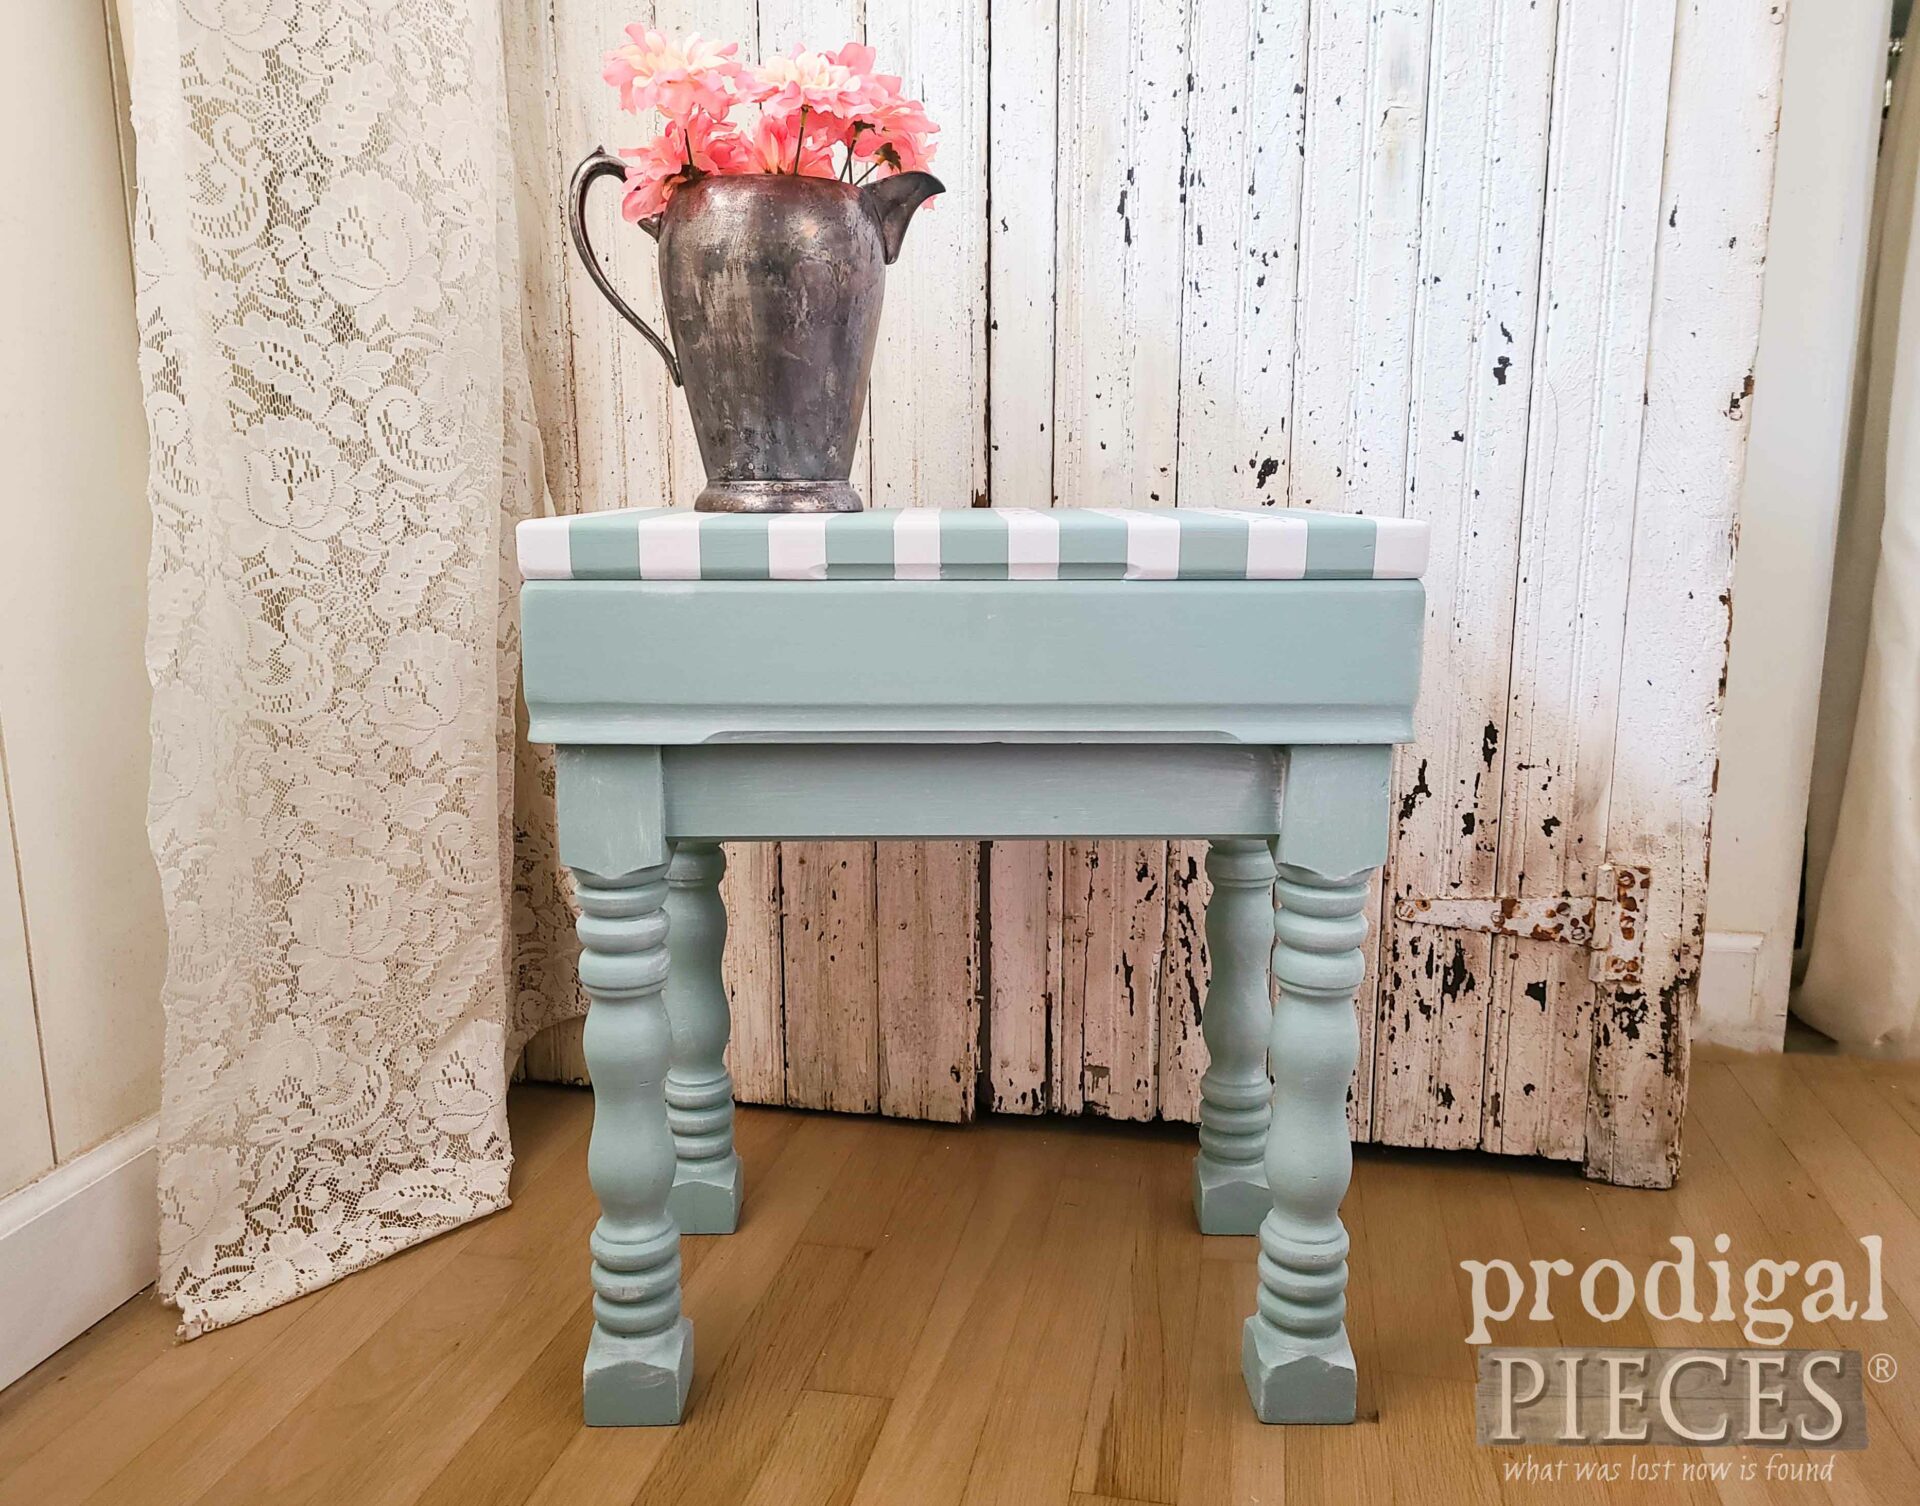 Shabby Chic Side Table with French Graphic by Larissa of Prodigal Pieces | prodigalpieces.com #prodigalpieces #shabbychic #french #upcycled